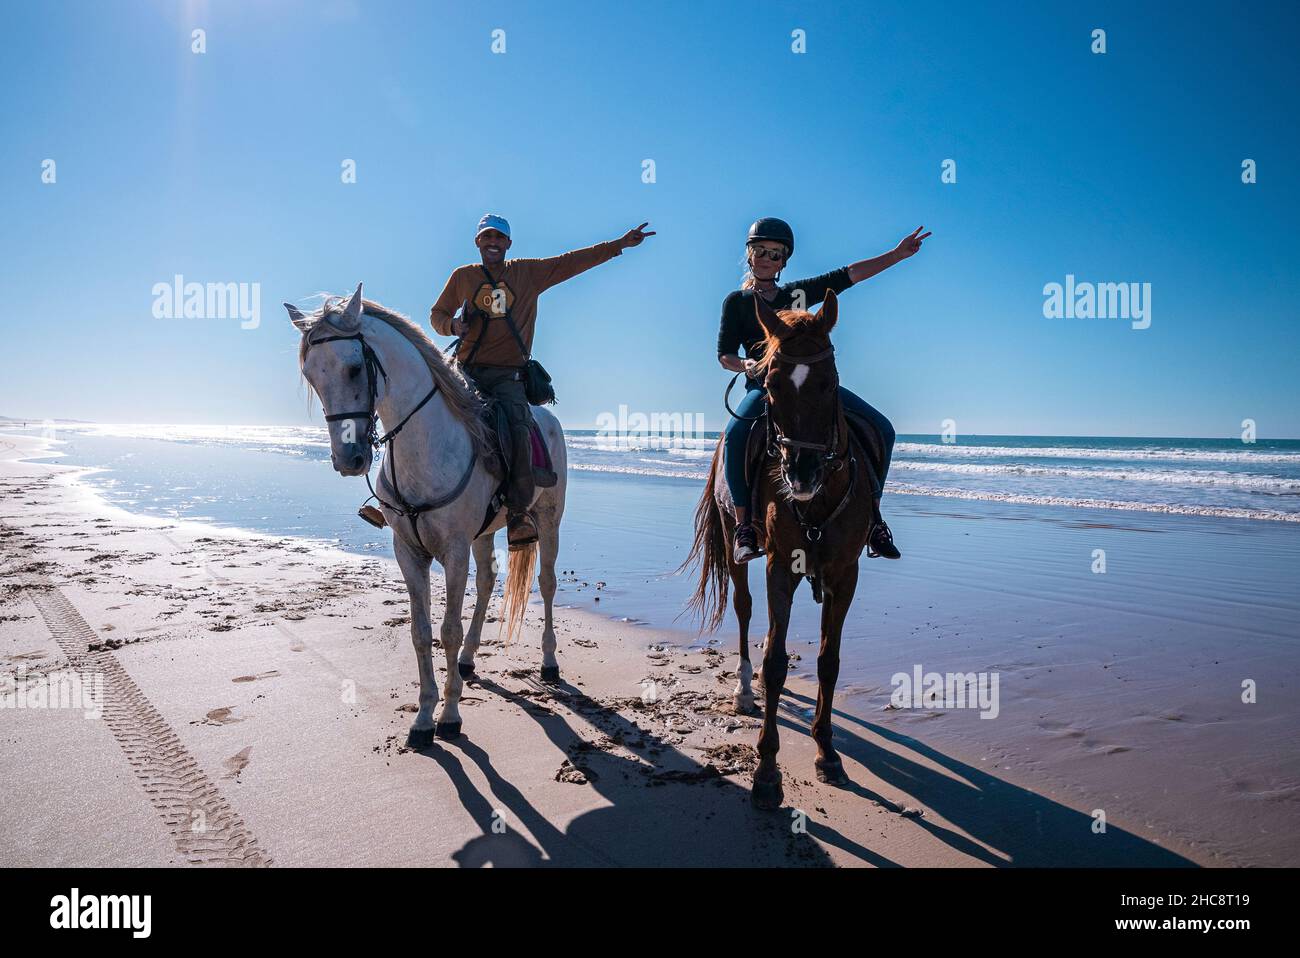 Man and woman showing victory hands gestures while sitting on horses at beach Stock Photo